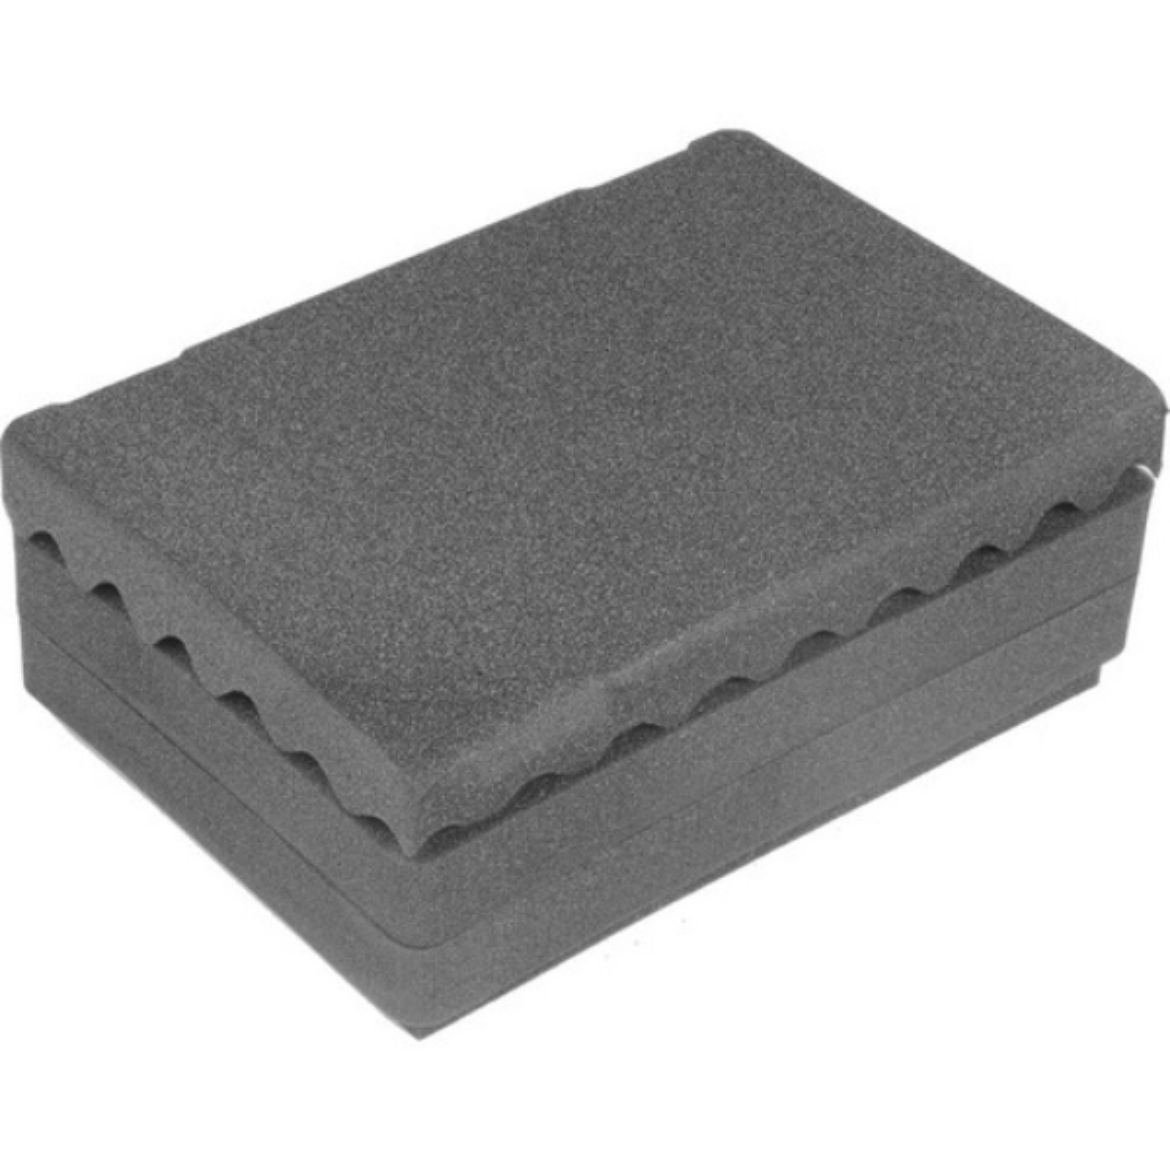 Picture of PELICAN iM2300 REPLACEMENT FOAM SET